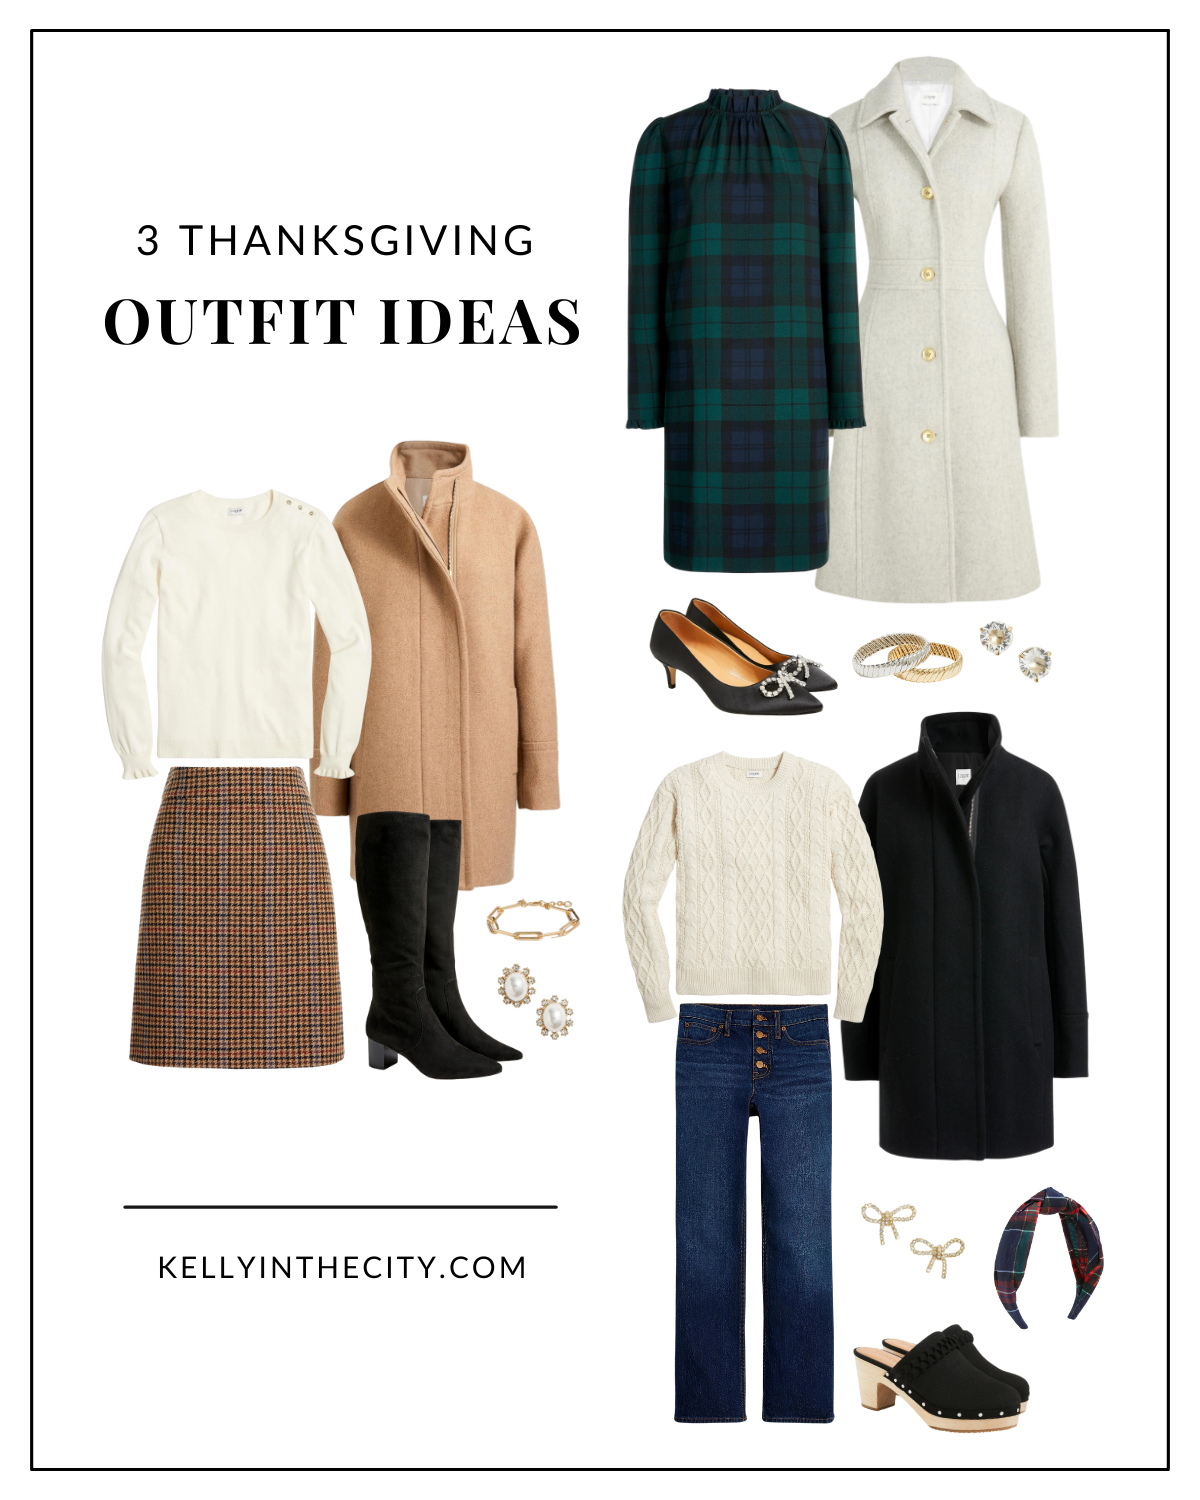 3 Thanksgiving Outfit Ideas, Kelly in the City